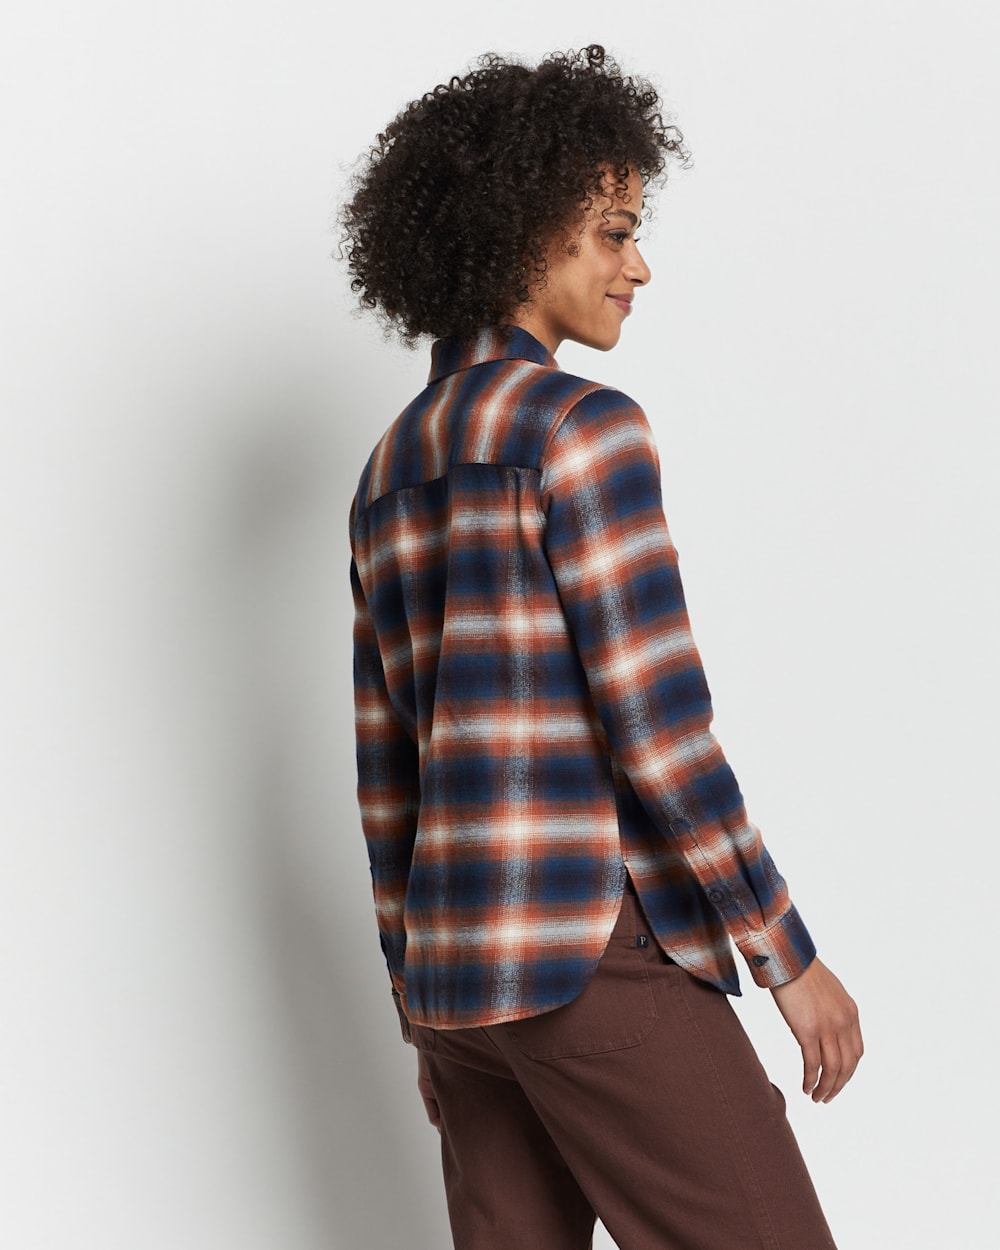 ALTERNATE VIEW OF WOMEN'S MADISON DOUBLEBRUSHED FLANNEL SHIRT IN NAVY MULTI PLAID image number 3